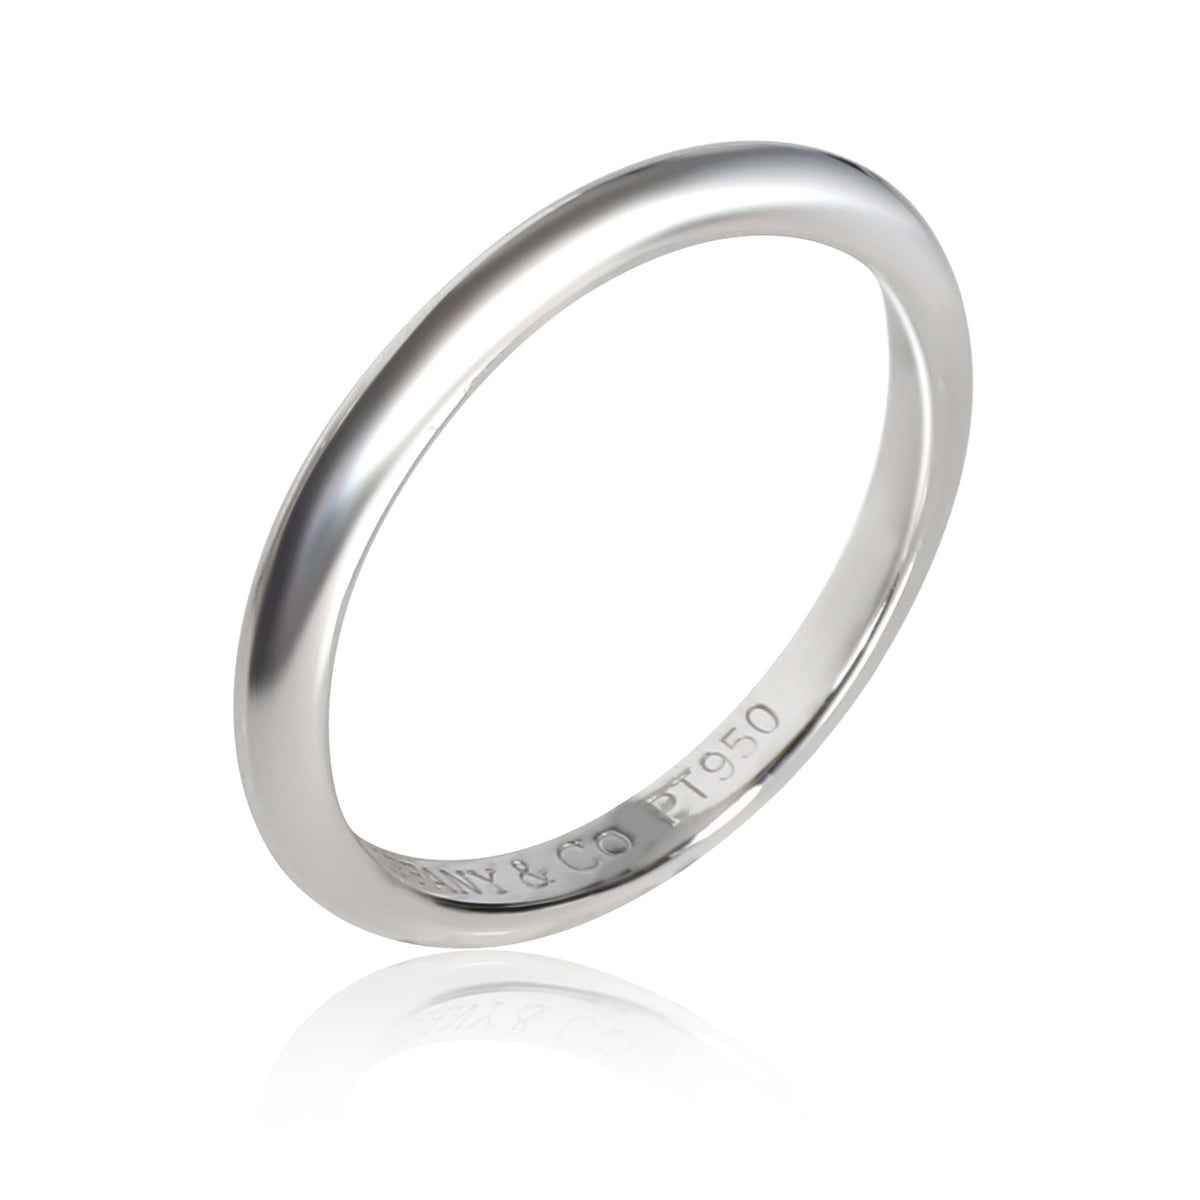 Tiffany & Co. Knife Edge Band in Platinum 2mm